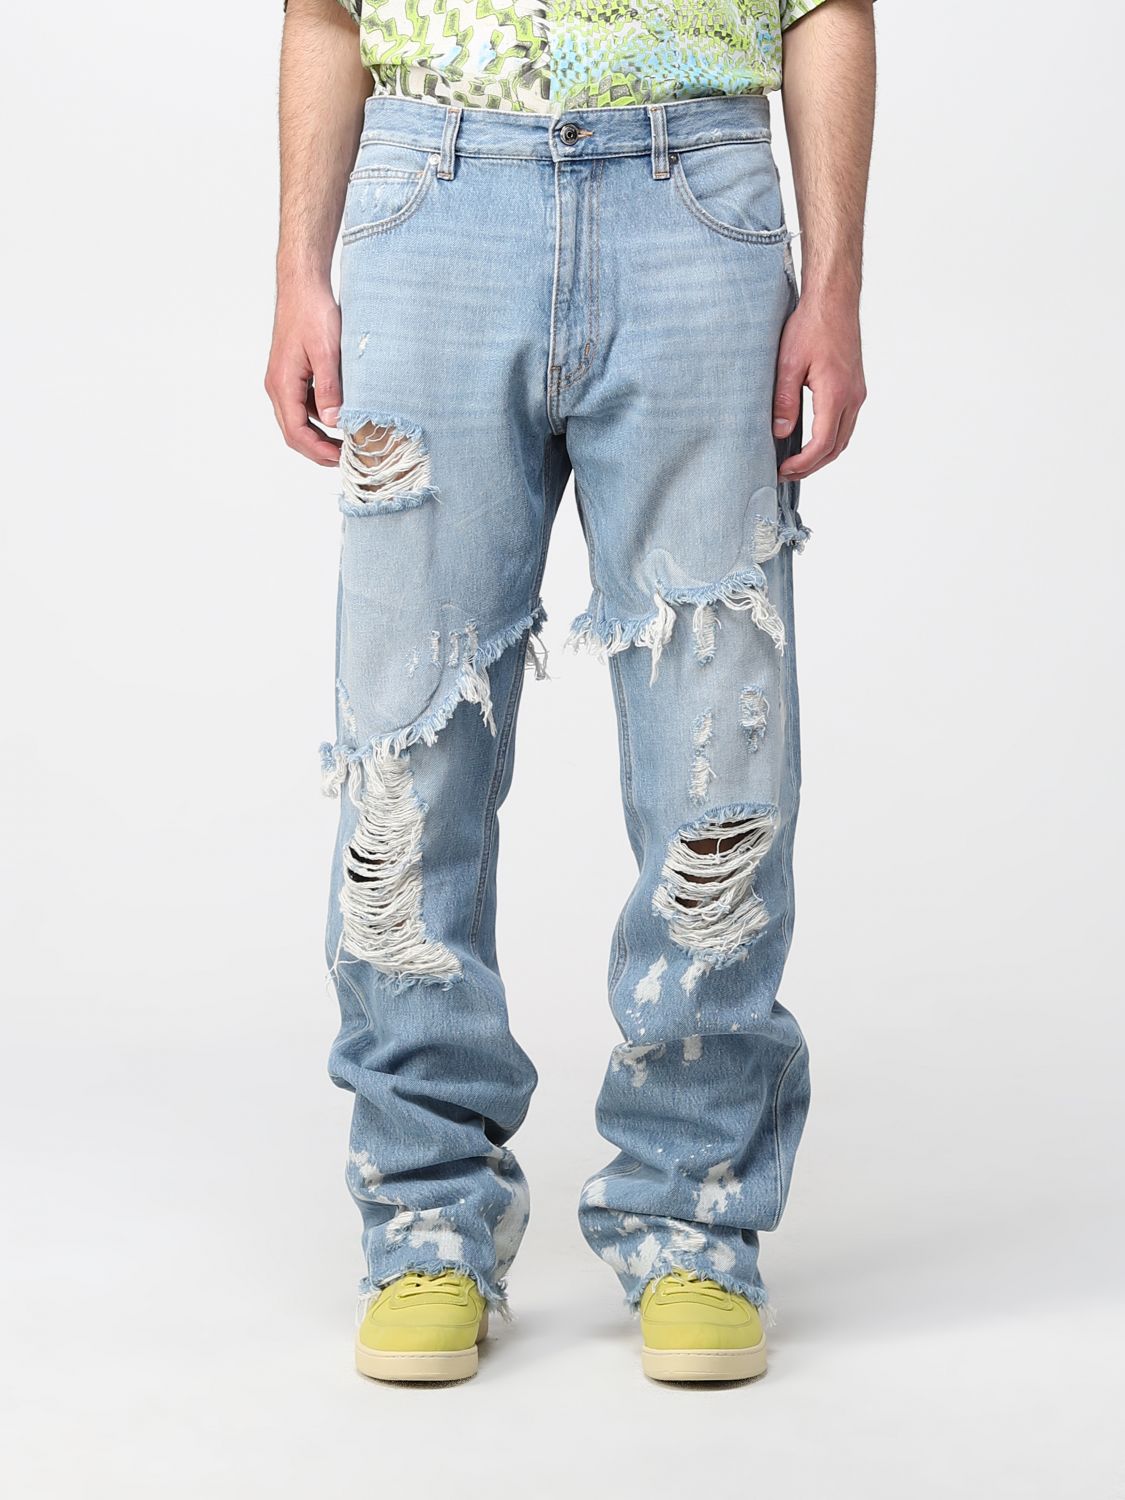 pil lamp Puno JUST CAVALLI: jeans in washed ripped denim - Denim | Just Cavalli jeans  S01LA0144N31990 online on GIGLIO.COM